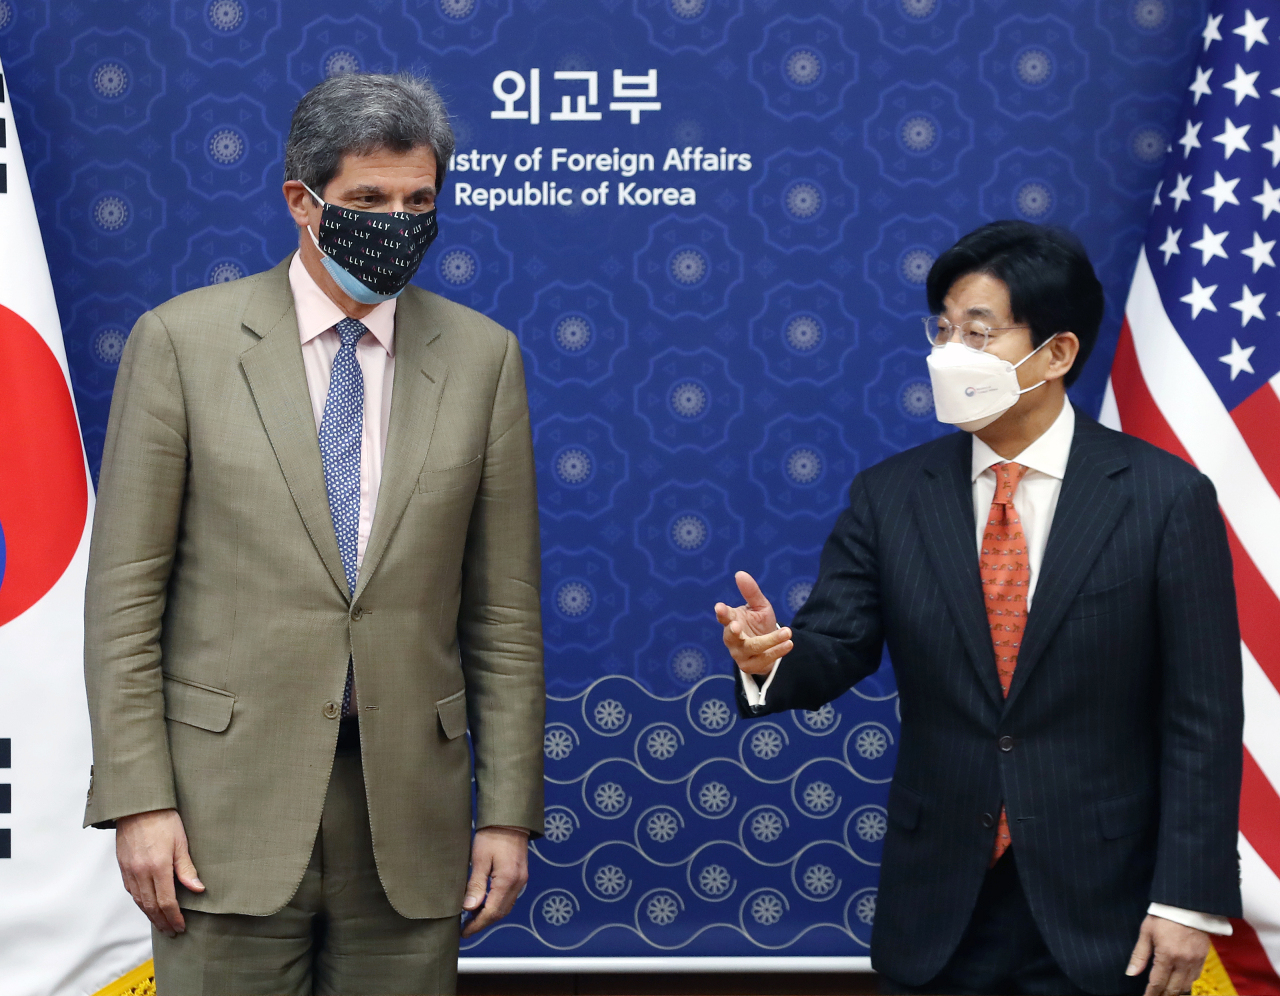 South Korea's Second Vice Foreign Minister Choi Jong-moon (right)and Jose Fernandez, US undersecretary of state for economic growth, energy and the environment, pose for a photo as they meet for the sixth Senior Economic Dialogue held in Seoul on Friday. (Yonhap)